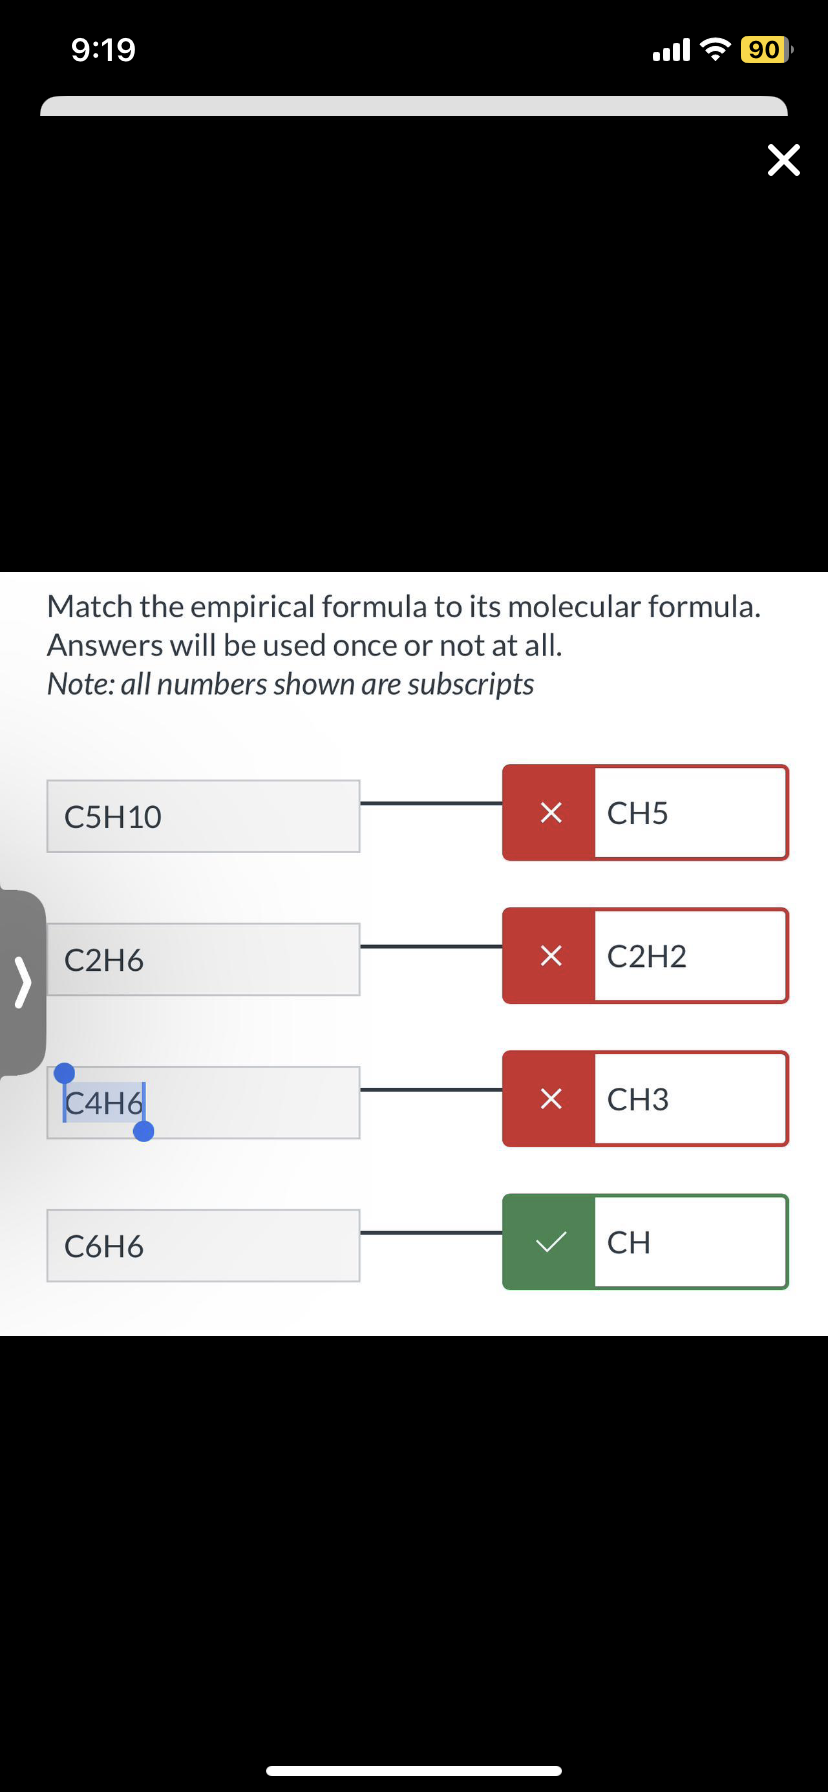 9:19
Match the empirical formula to its molecular formula.
Answers will be used once or not at all.
Note: all numbers shown are subscripts
C5H10
C2H6
C4H6
C6H6
×
CH5
X C2H2
X CH3
90
CH
×